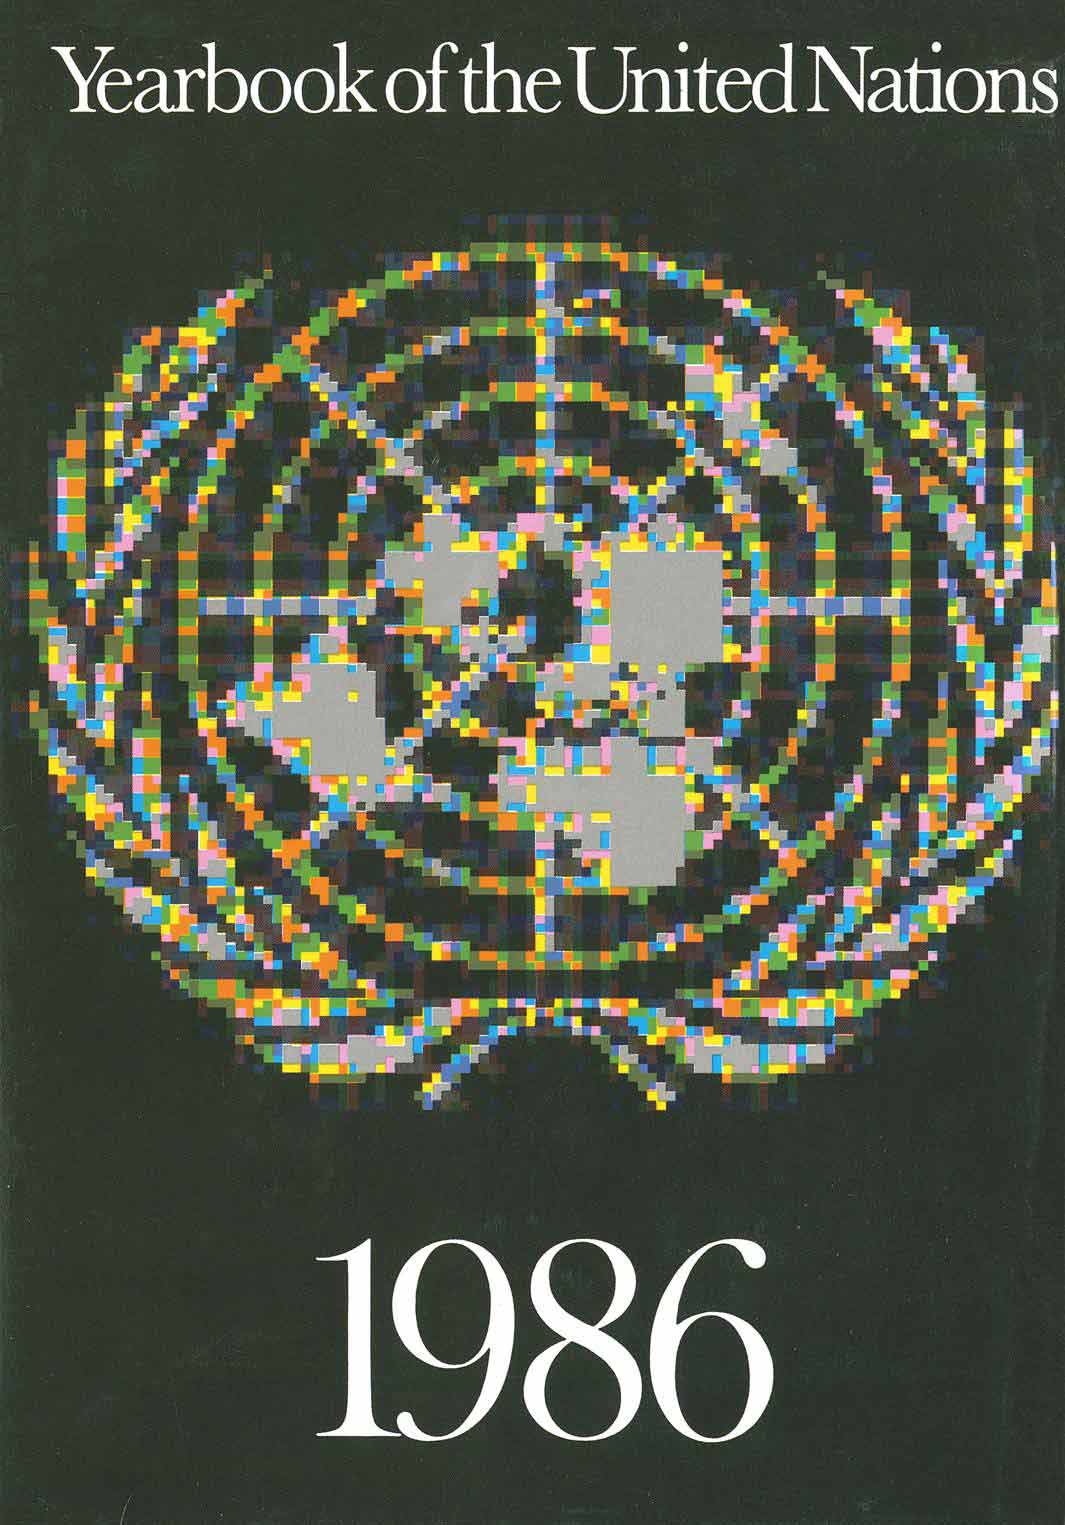 image of Yearbook of the United Nations 1986